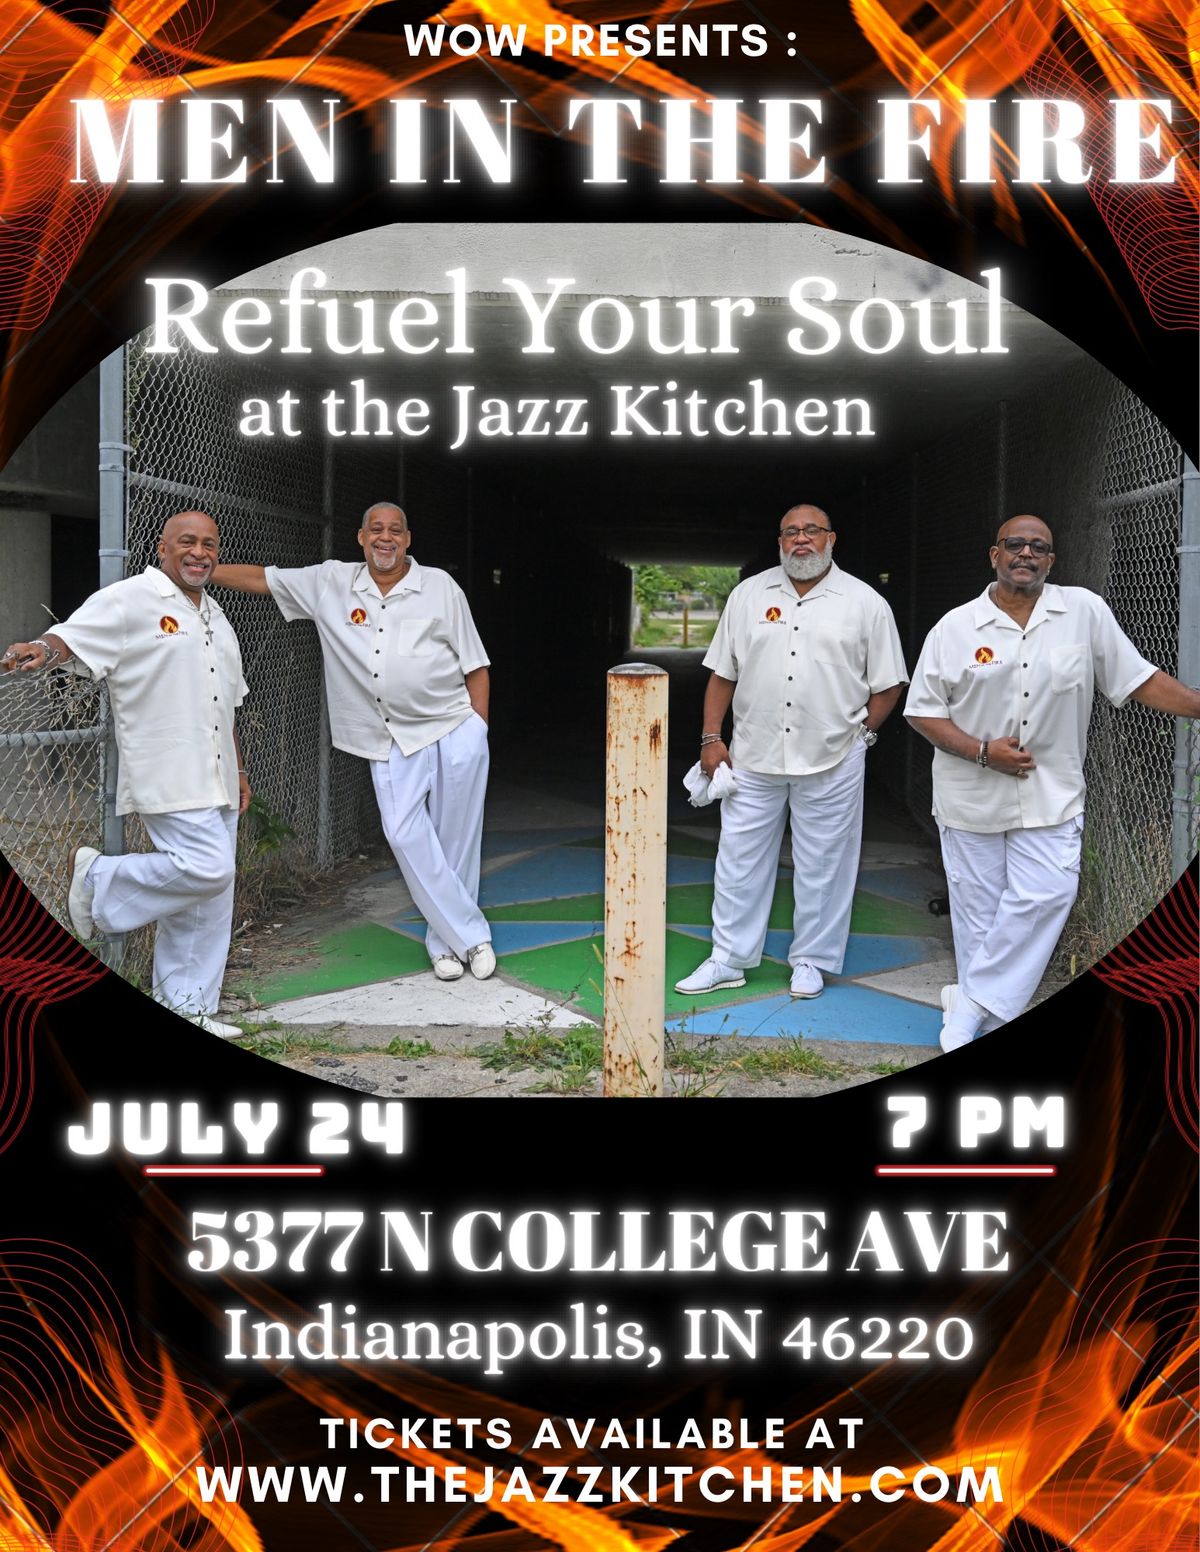 WOW Presents Men In The Fire at The Jazz Kitchen